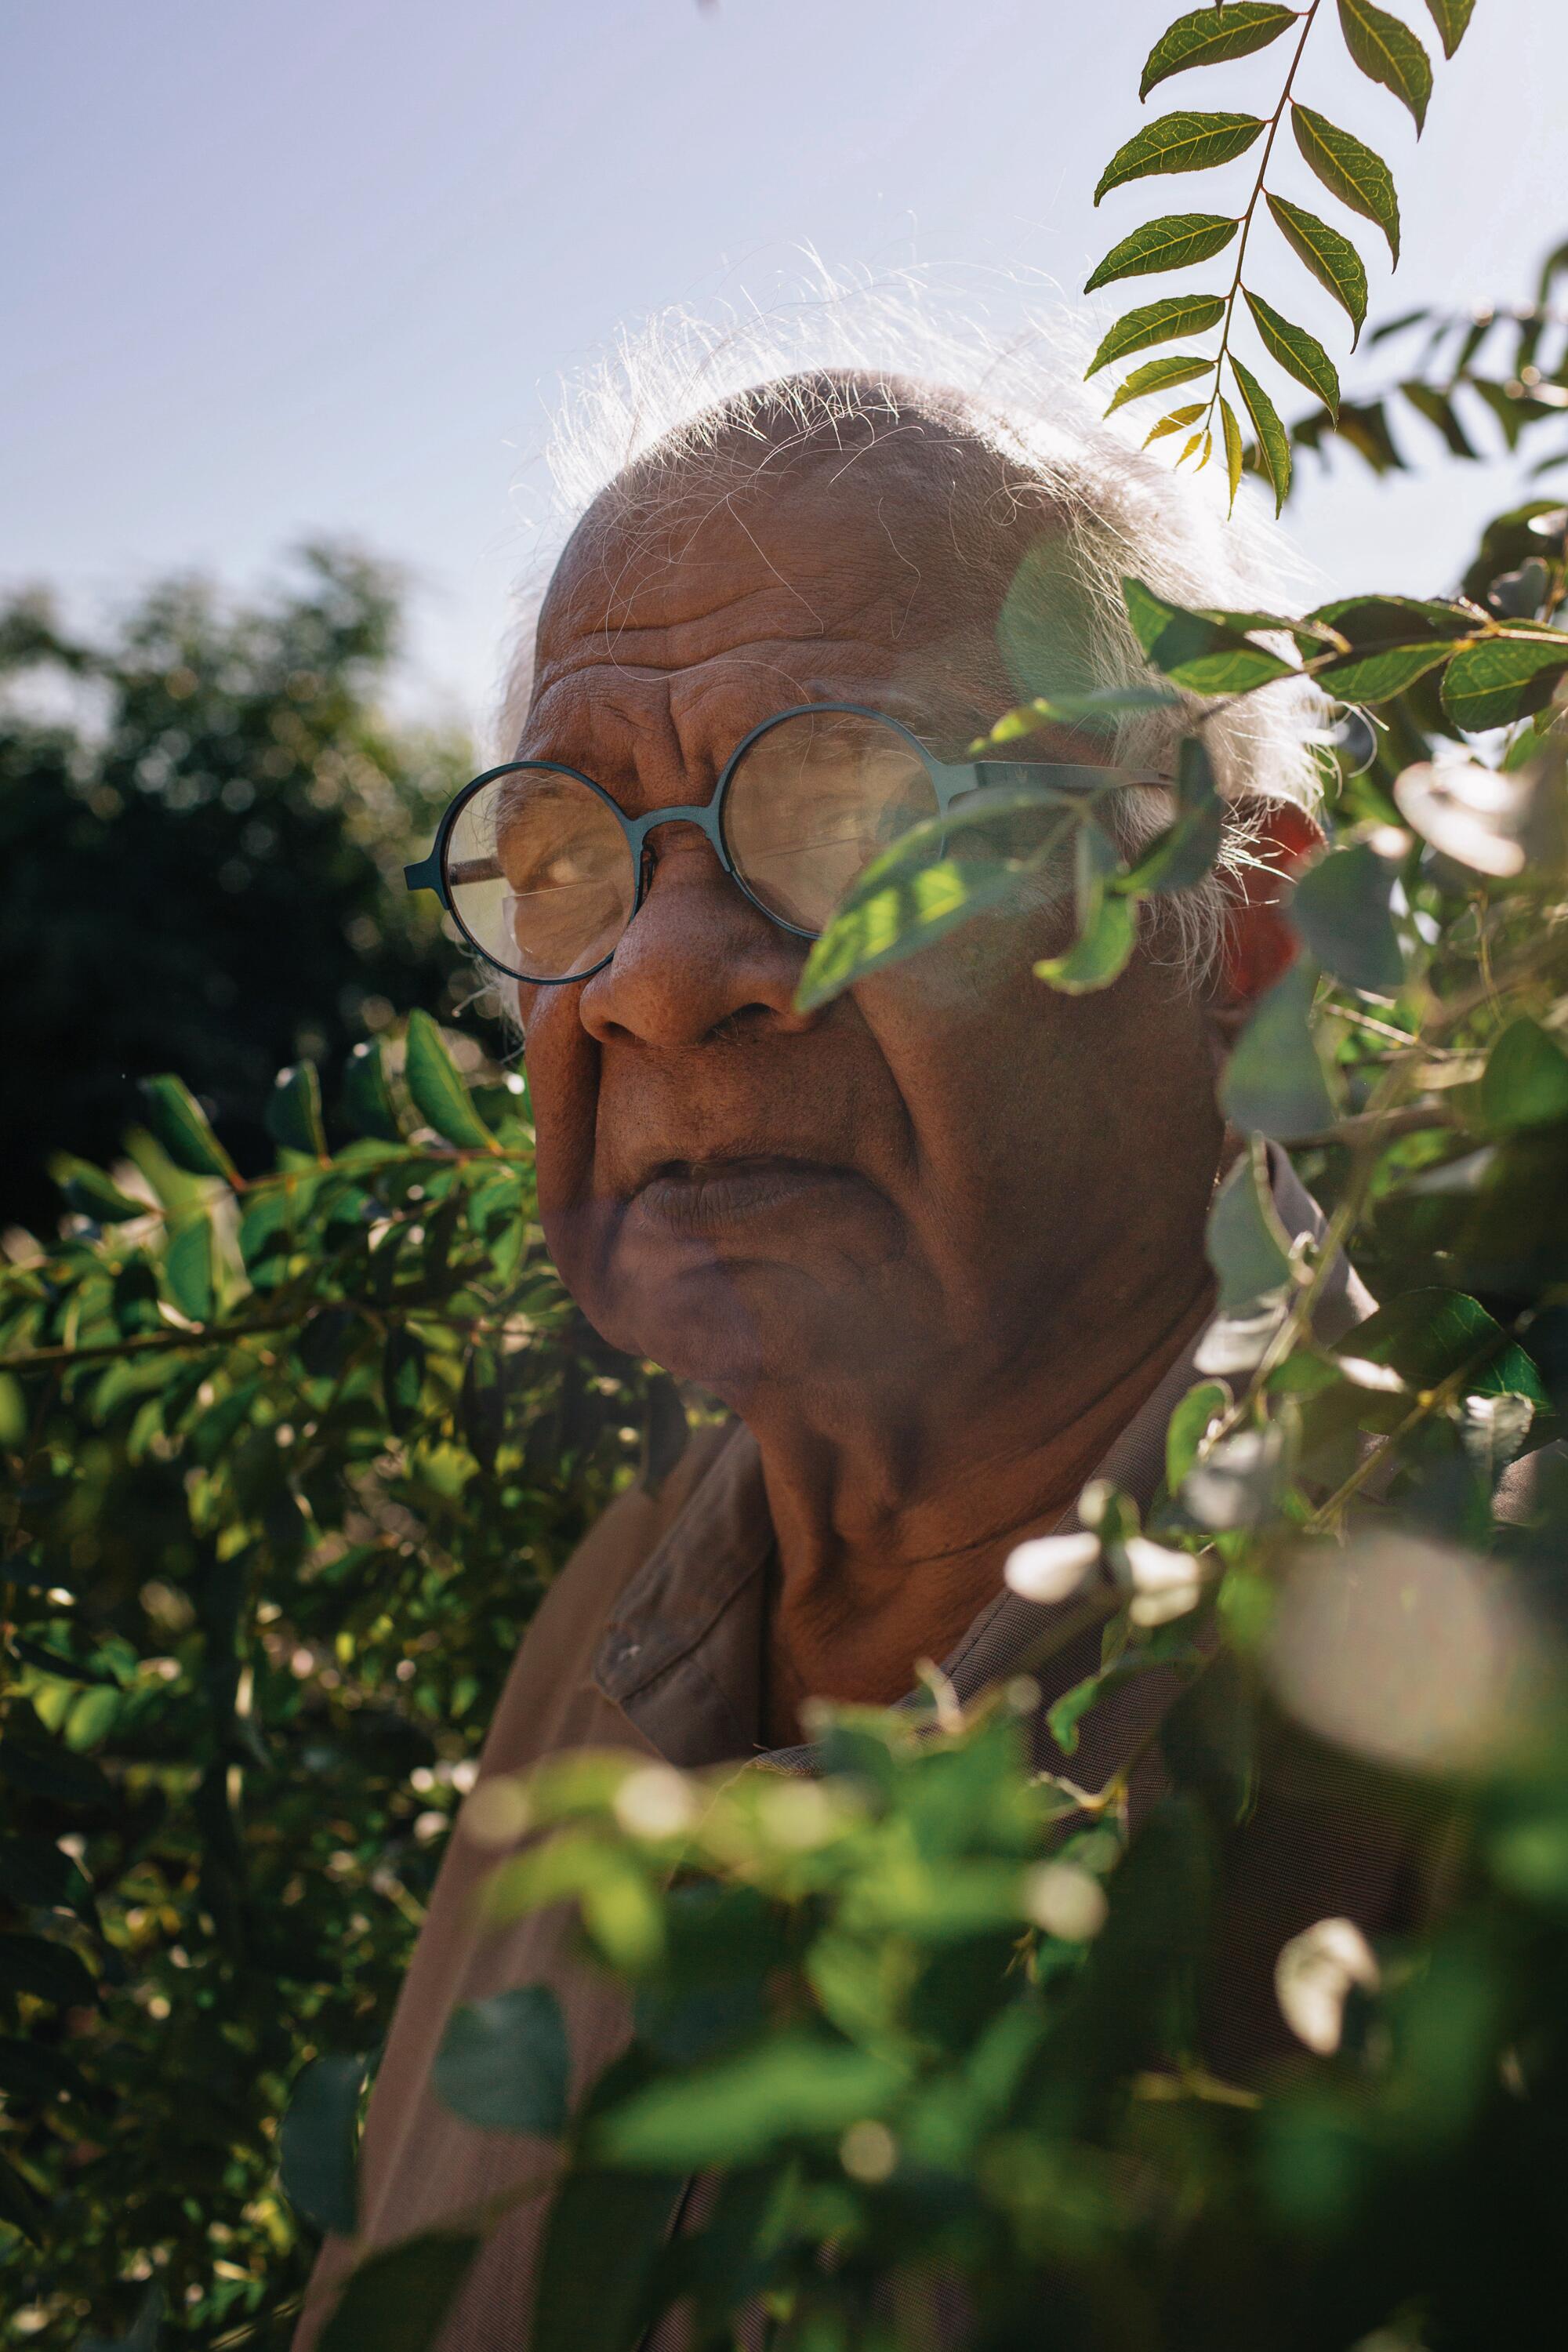 An older man wearing glasses stands amid leafy trees.